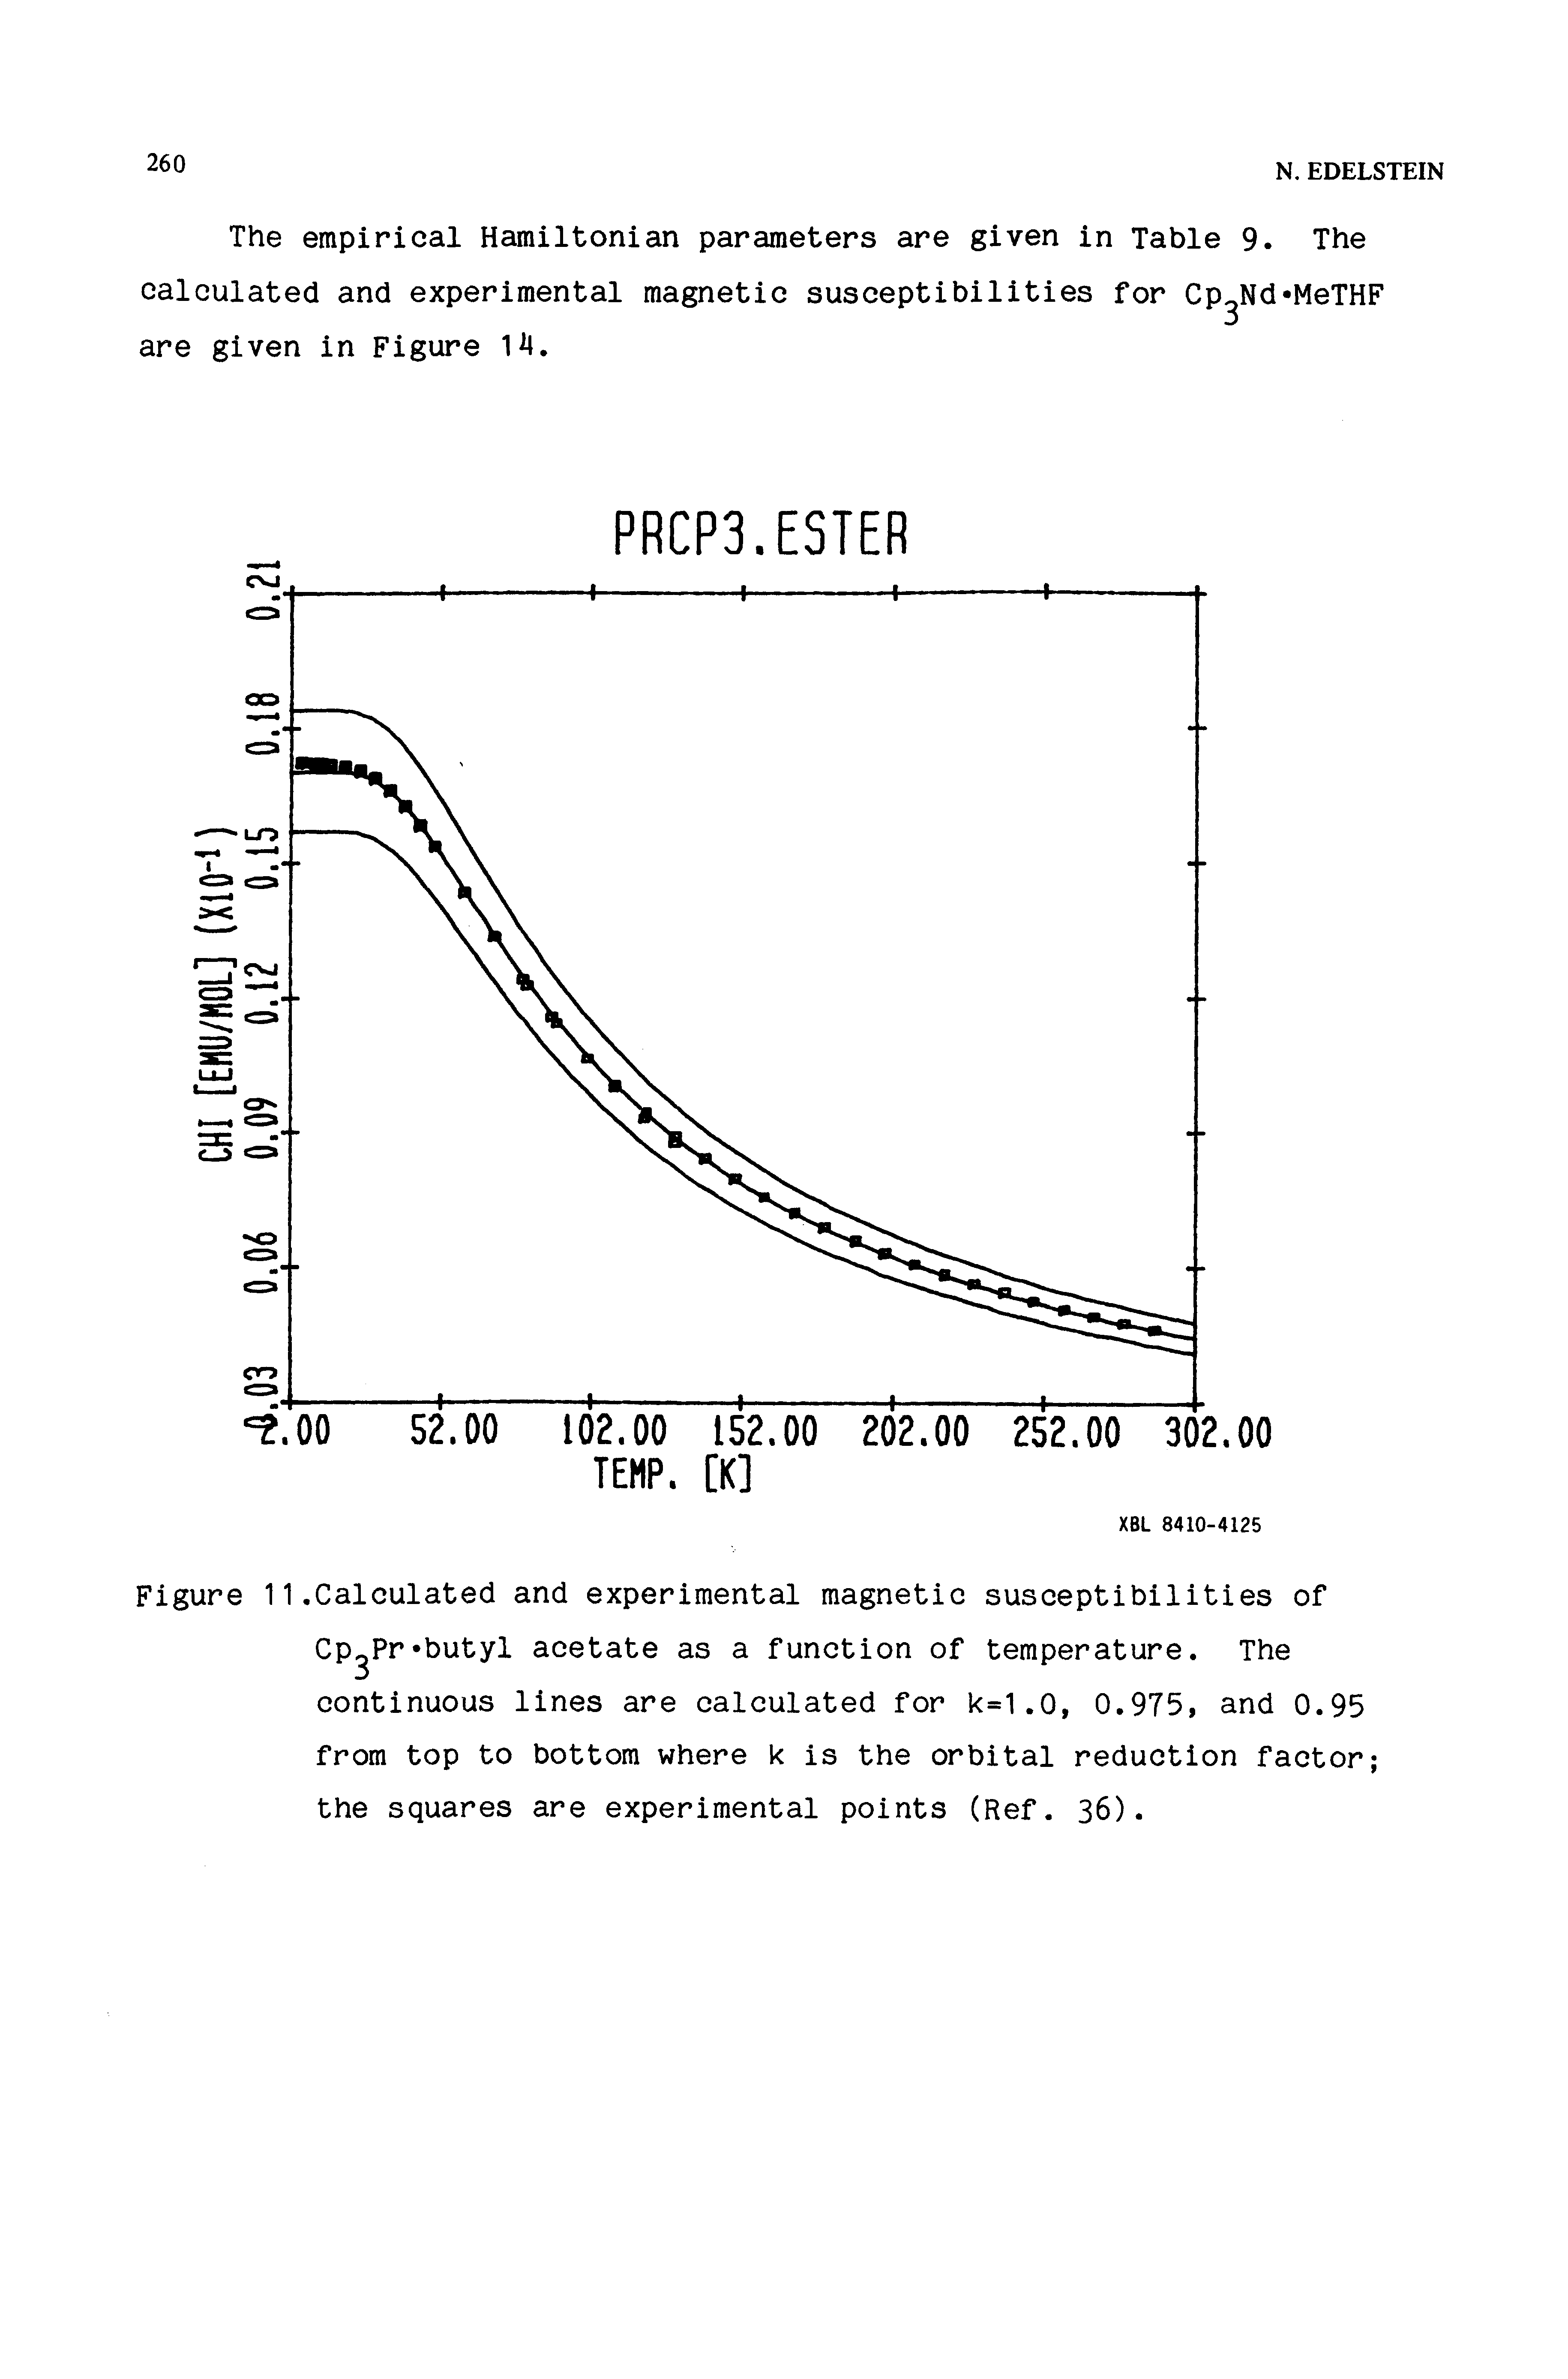 Figure 11.Calculated and experimental magnetic susceptibilities of Cp Pr butyl acetate as a function of temperature. The continuous lines are calculated for k 1.0, 0.975, and 0.95 from top to bottom where k is the orbital reduction factor the squares are experimental points (Ref. 36).